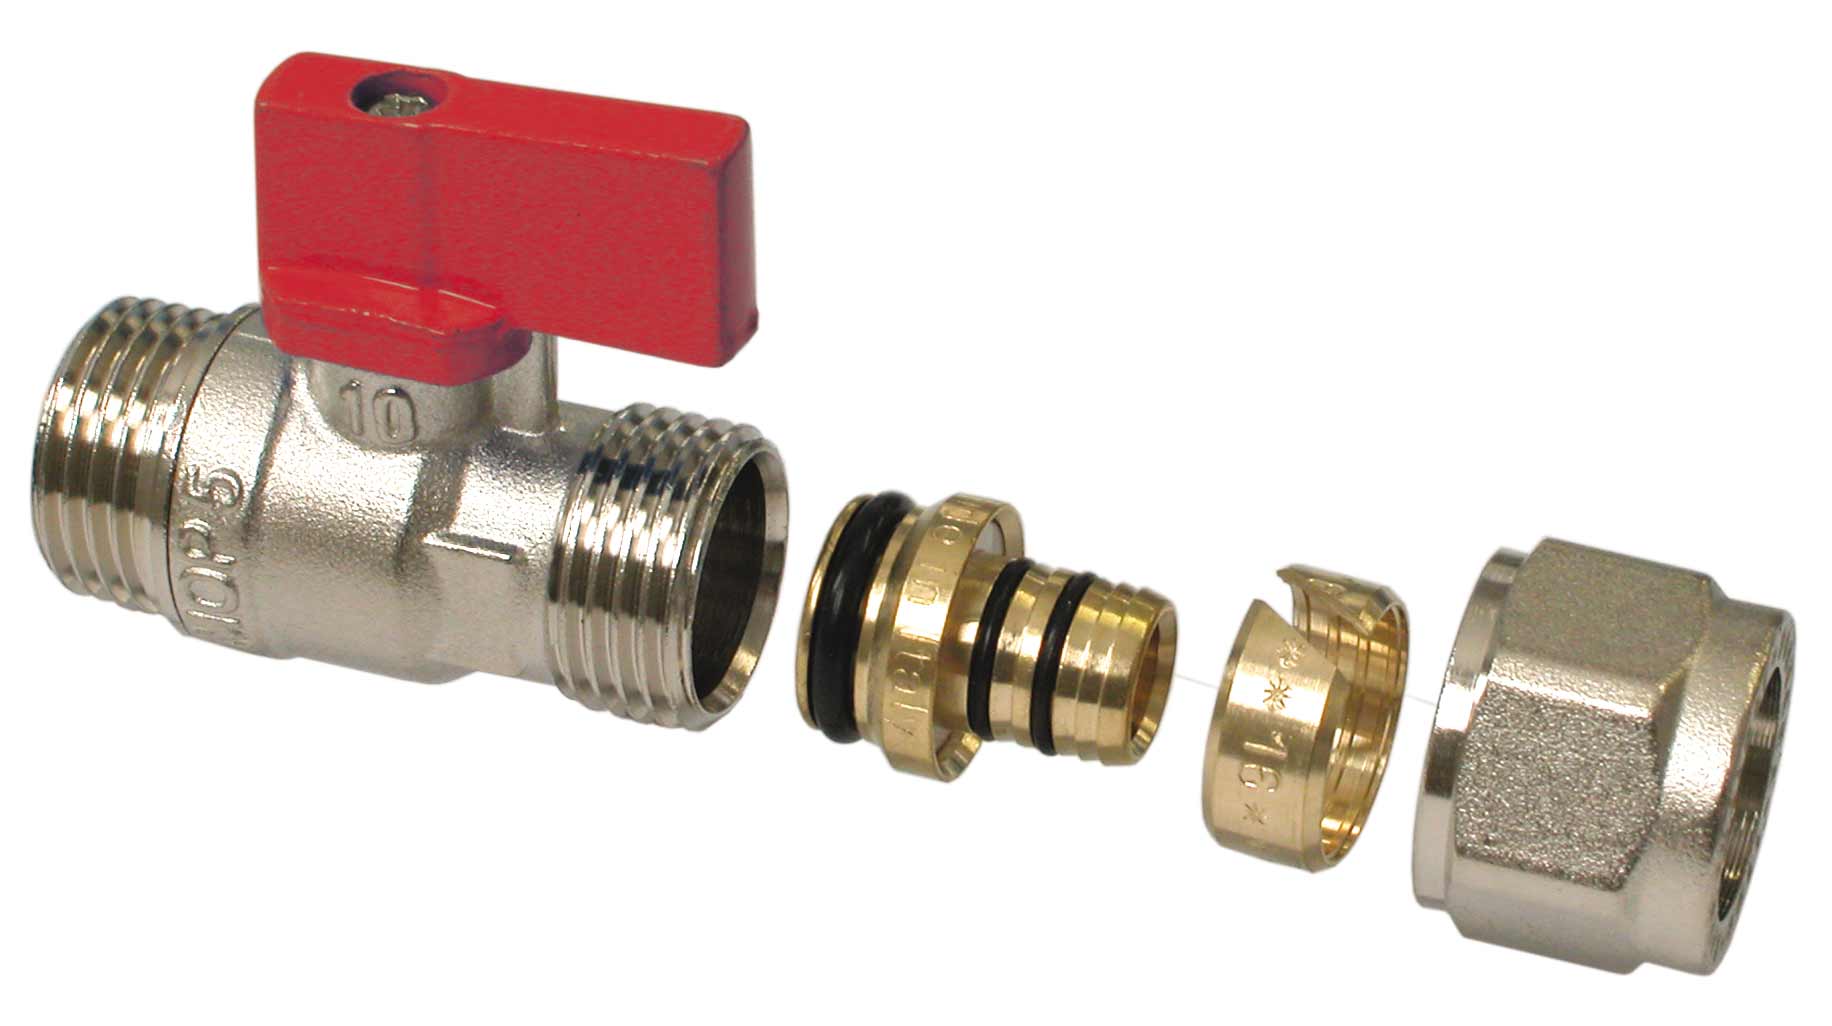 Mini Ball Valve 16 x 1/2M oring RED Nickelplated + removable nipple